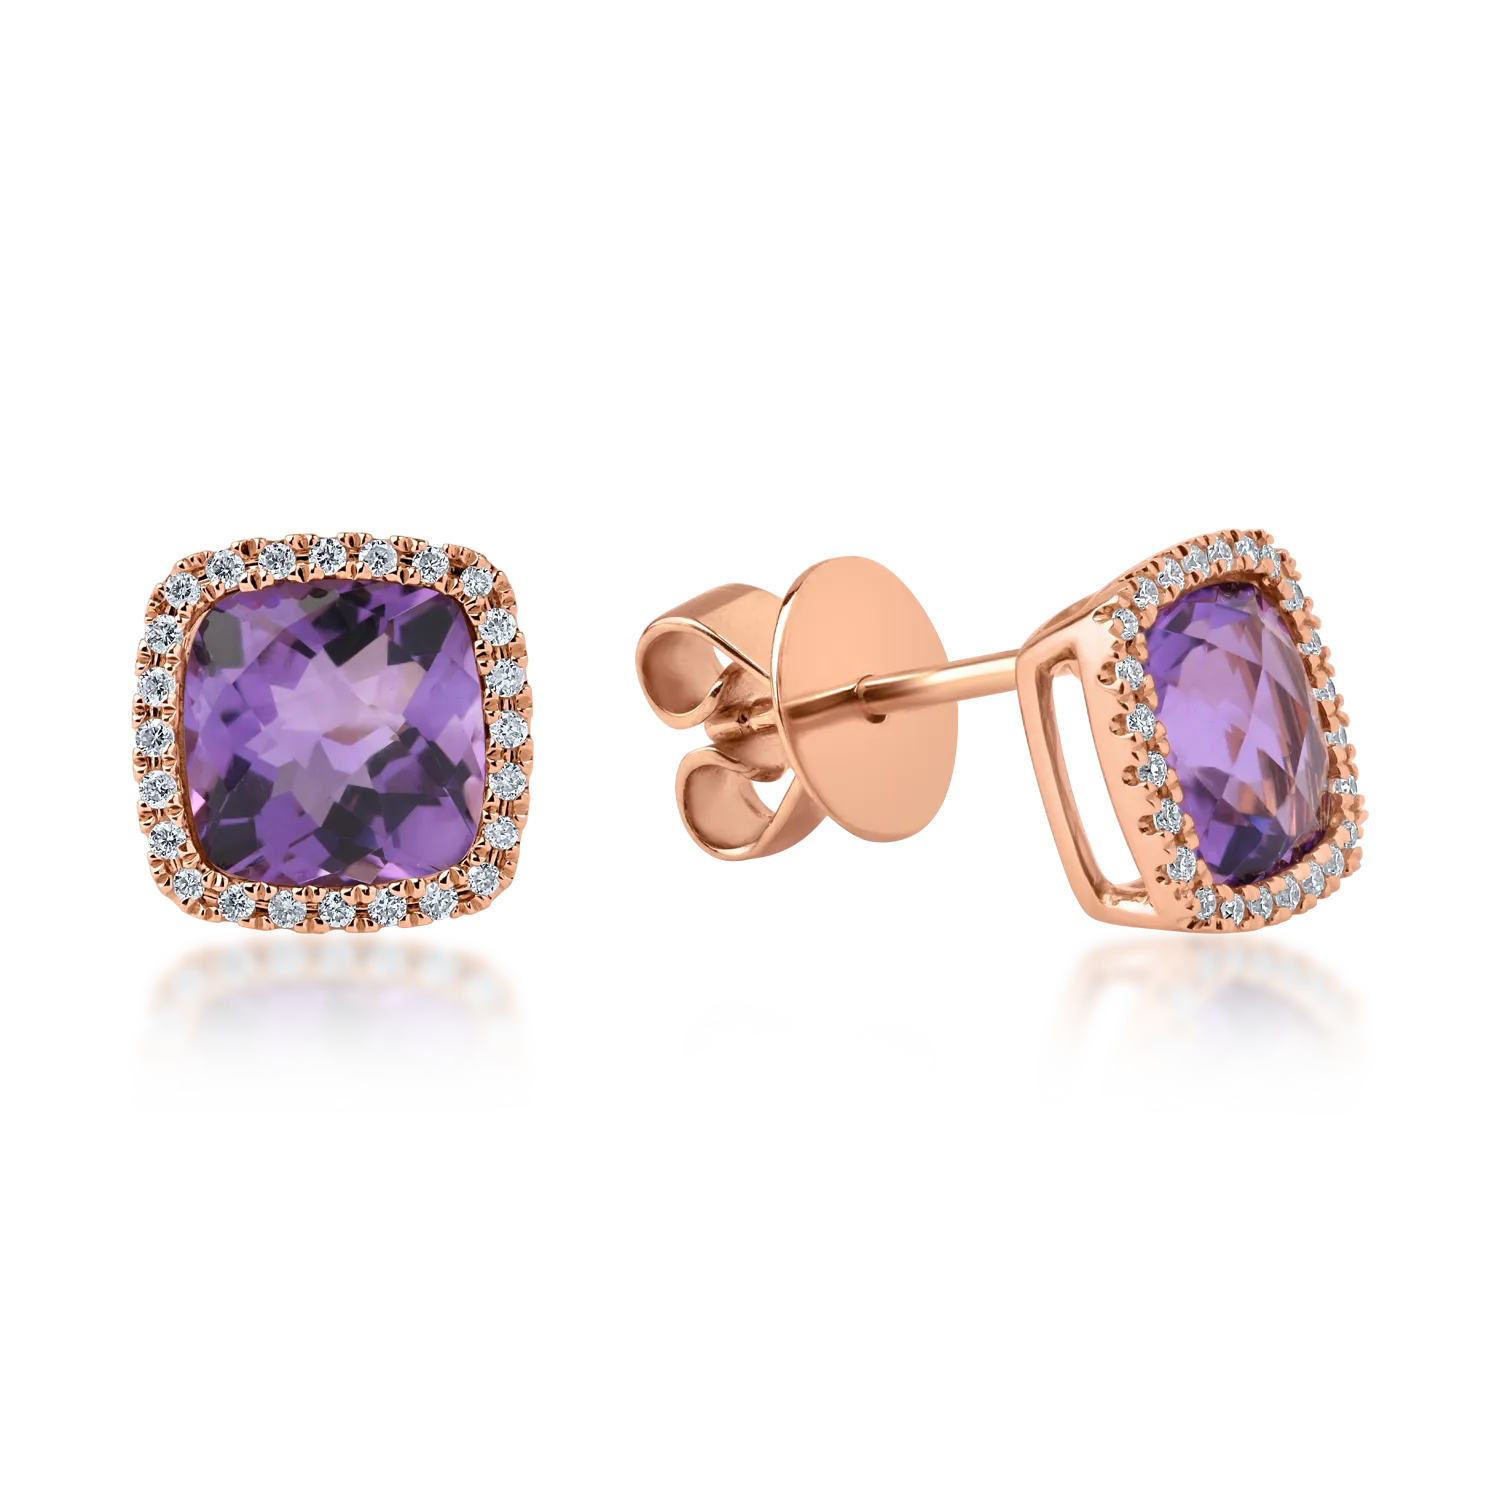 Rose gold earrings with 3.2ct amethysts and 0.16ct diamonds